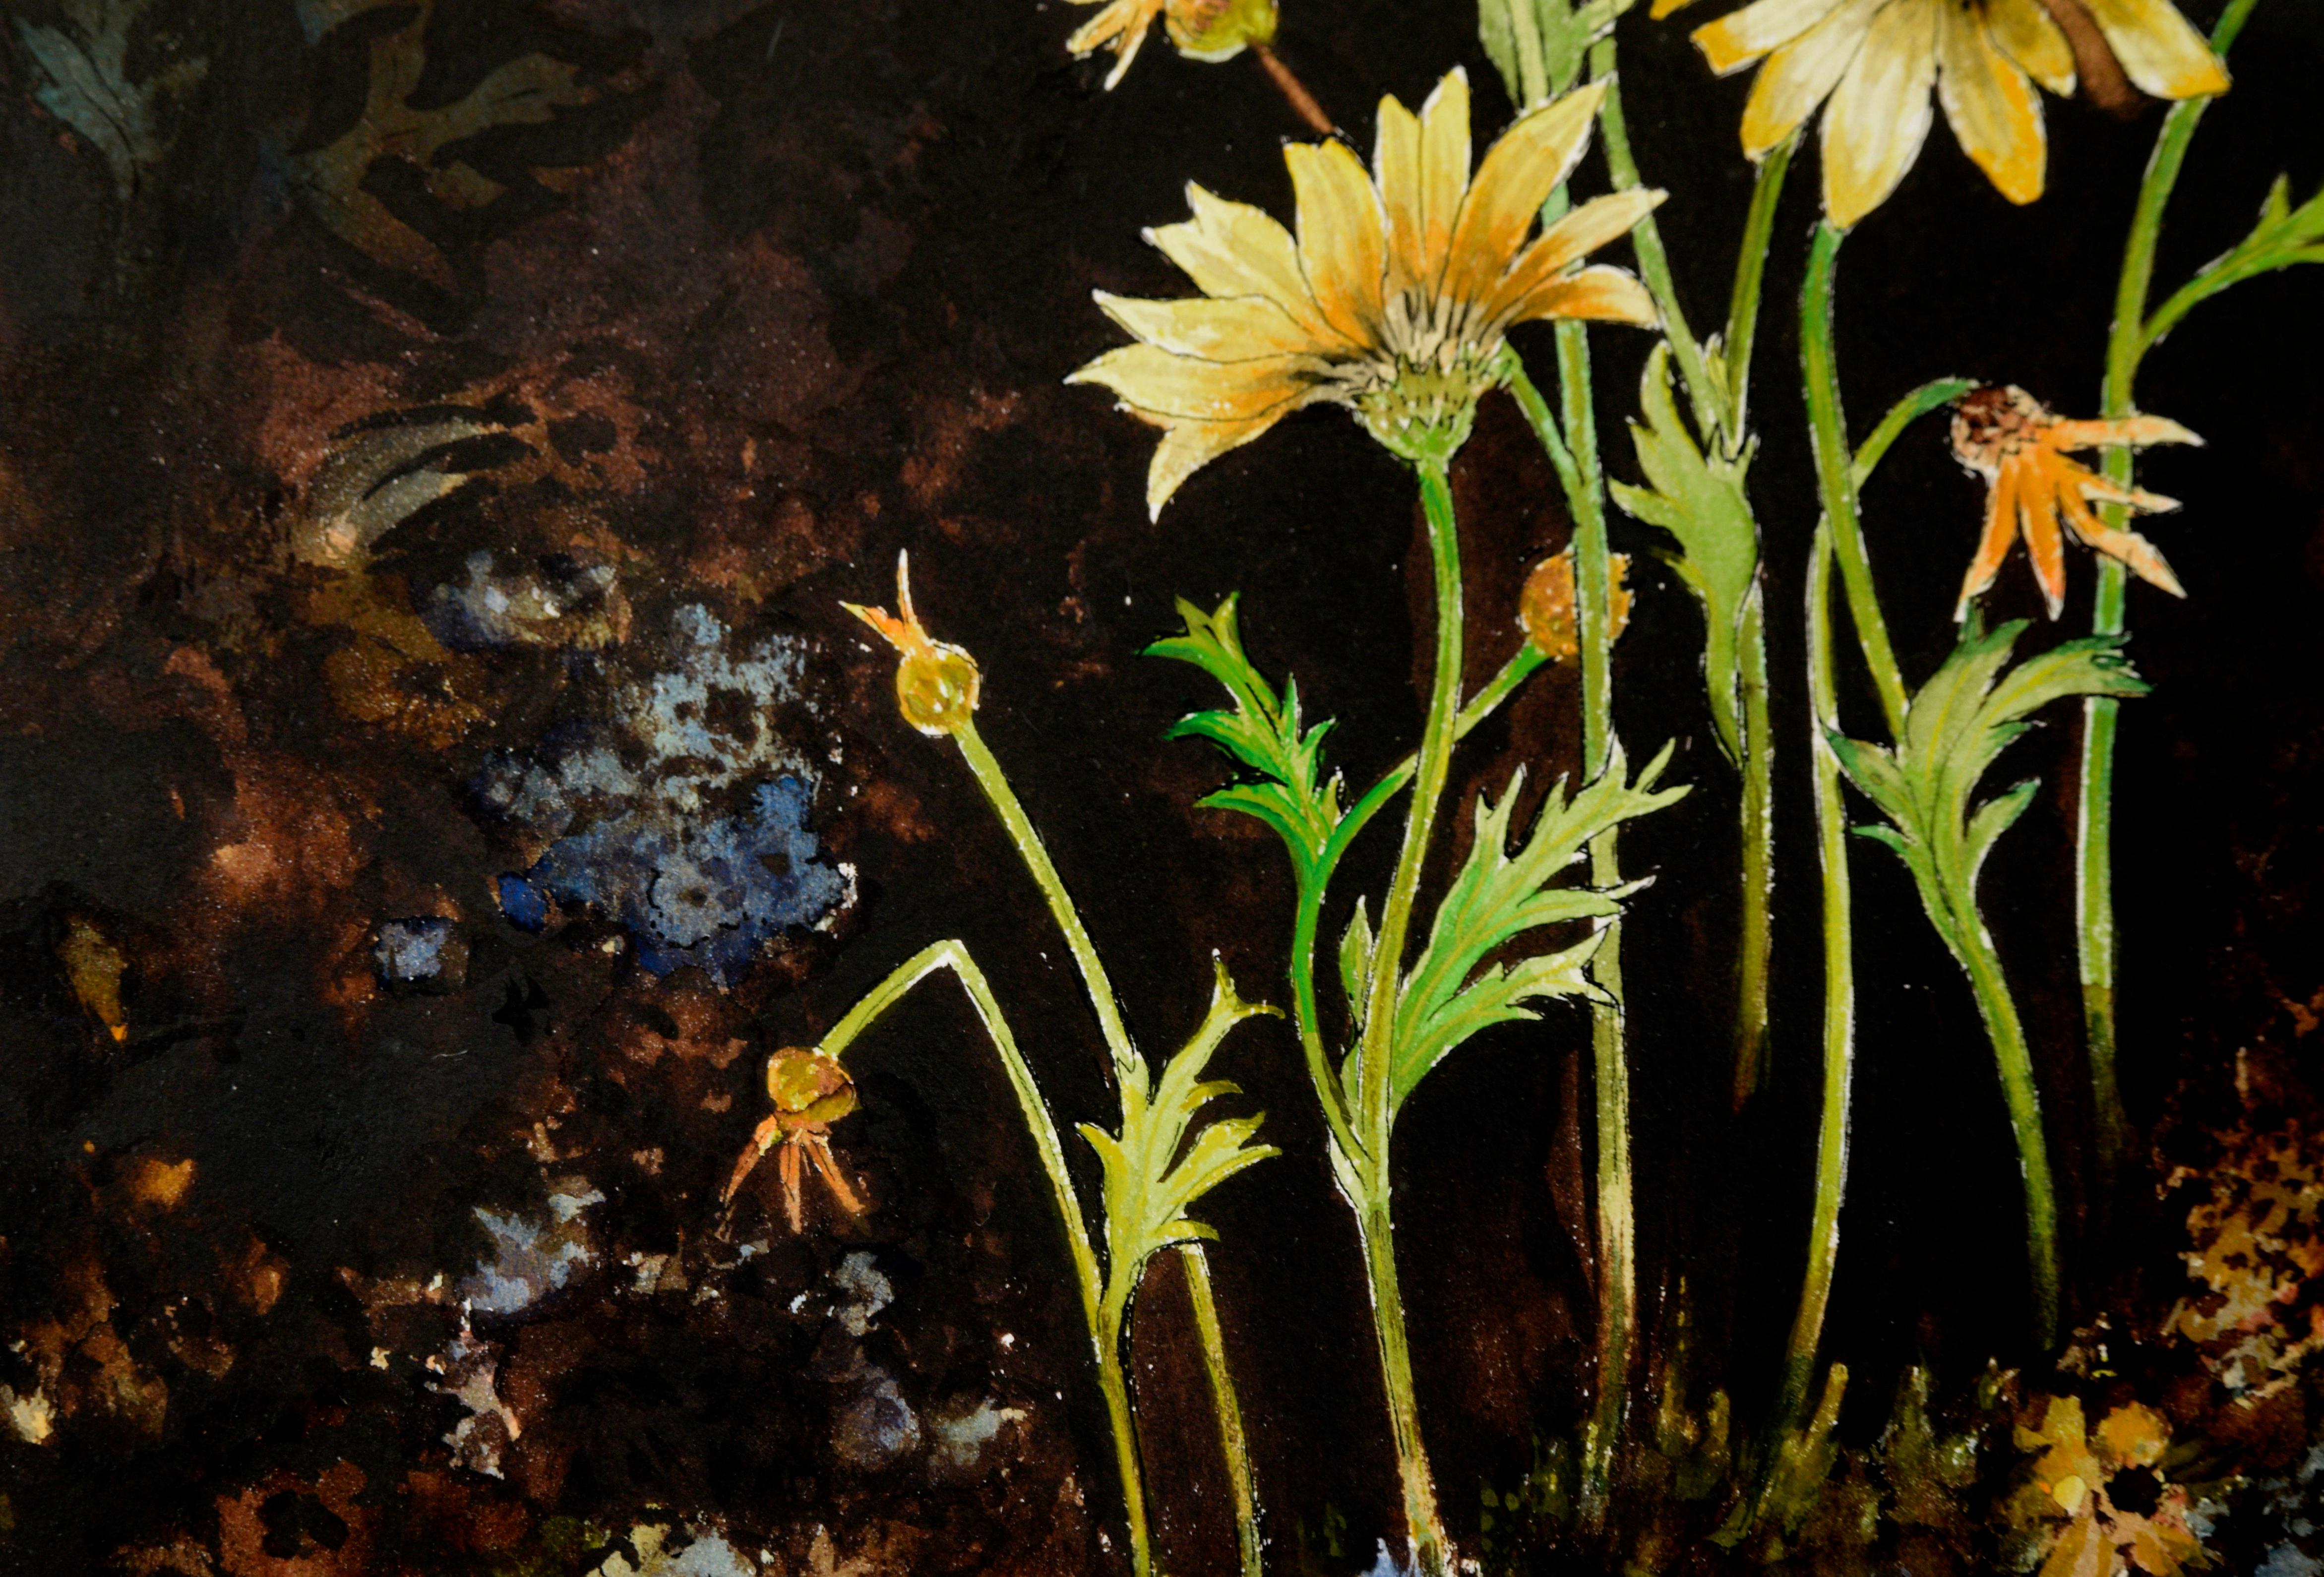 Vibrant, saturated watercolor of yellow daises and other flowers by Walnut Creek, California artist Olga Degles (French/American, 1911-1999). Several daisies are depicted against a dark umber background, creating an intense contrast. The dark area